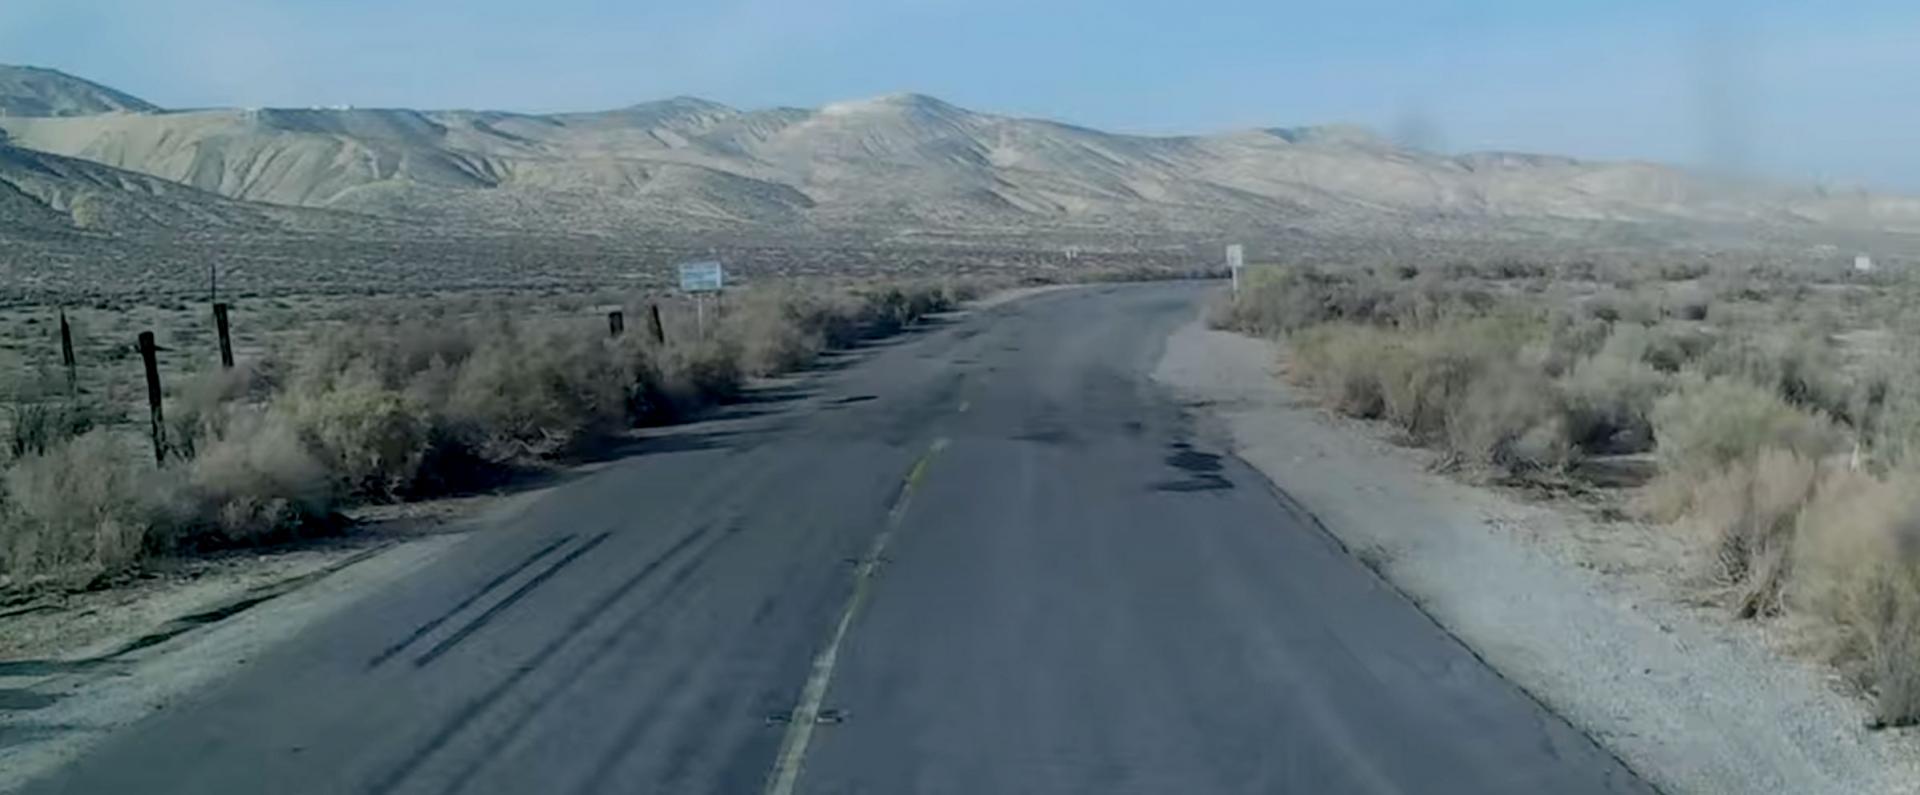 A remote desert road next to mountains in Maricopa, California